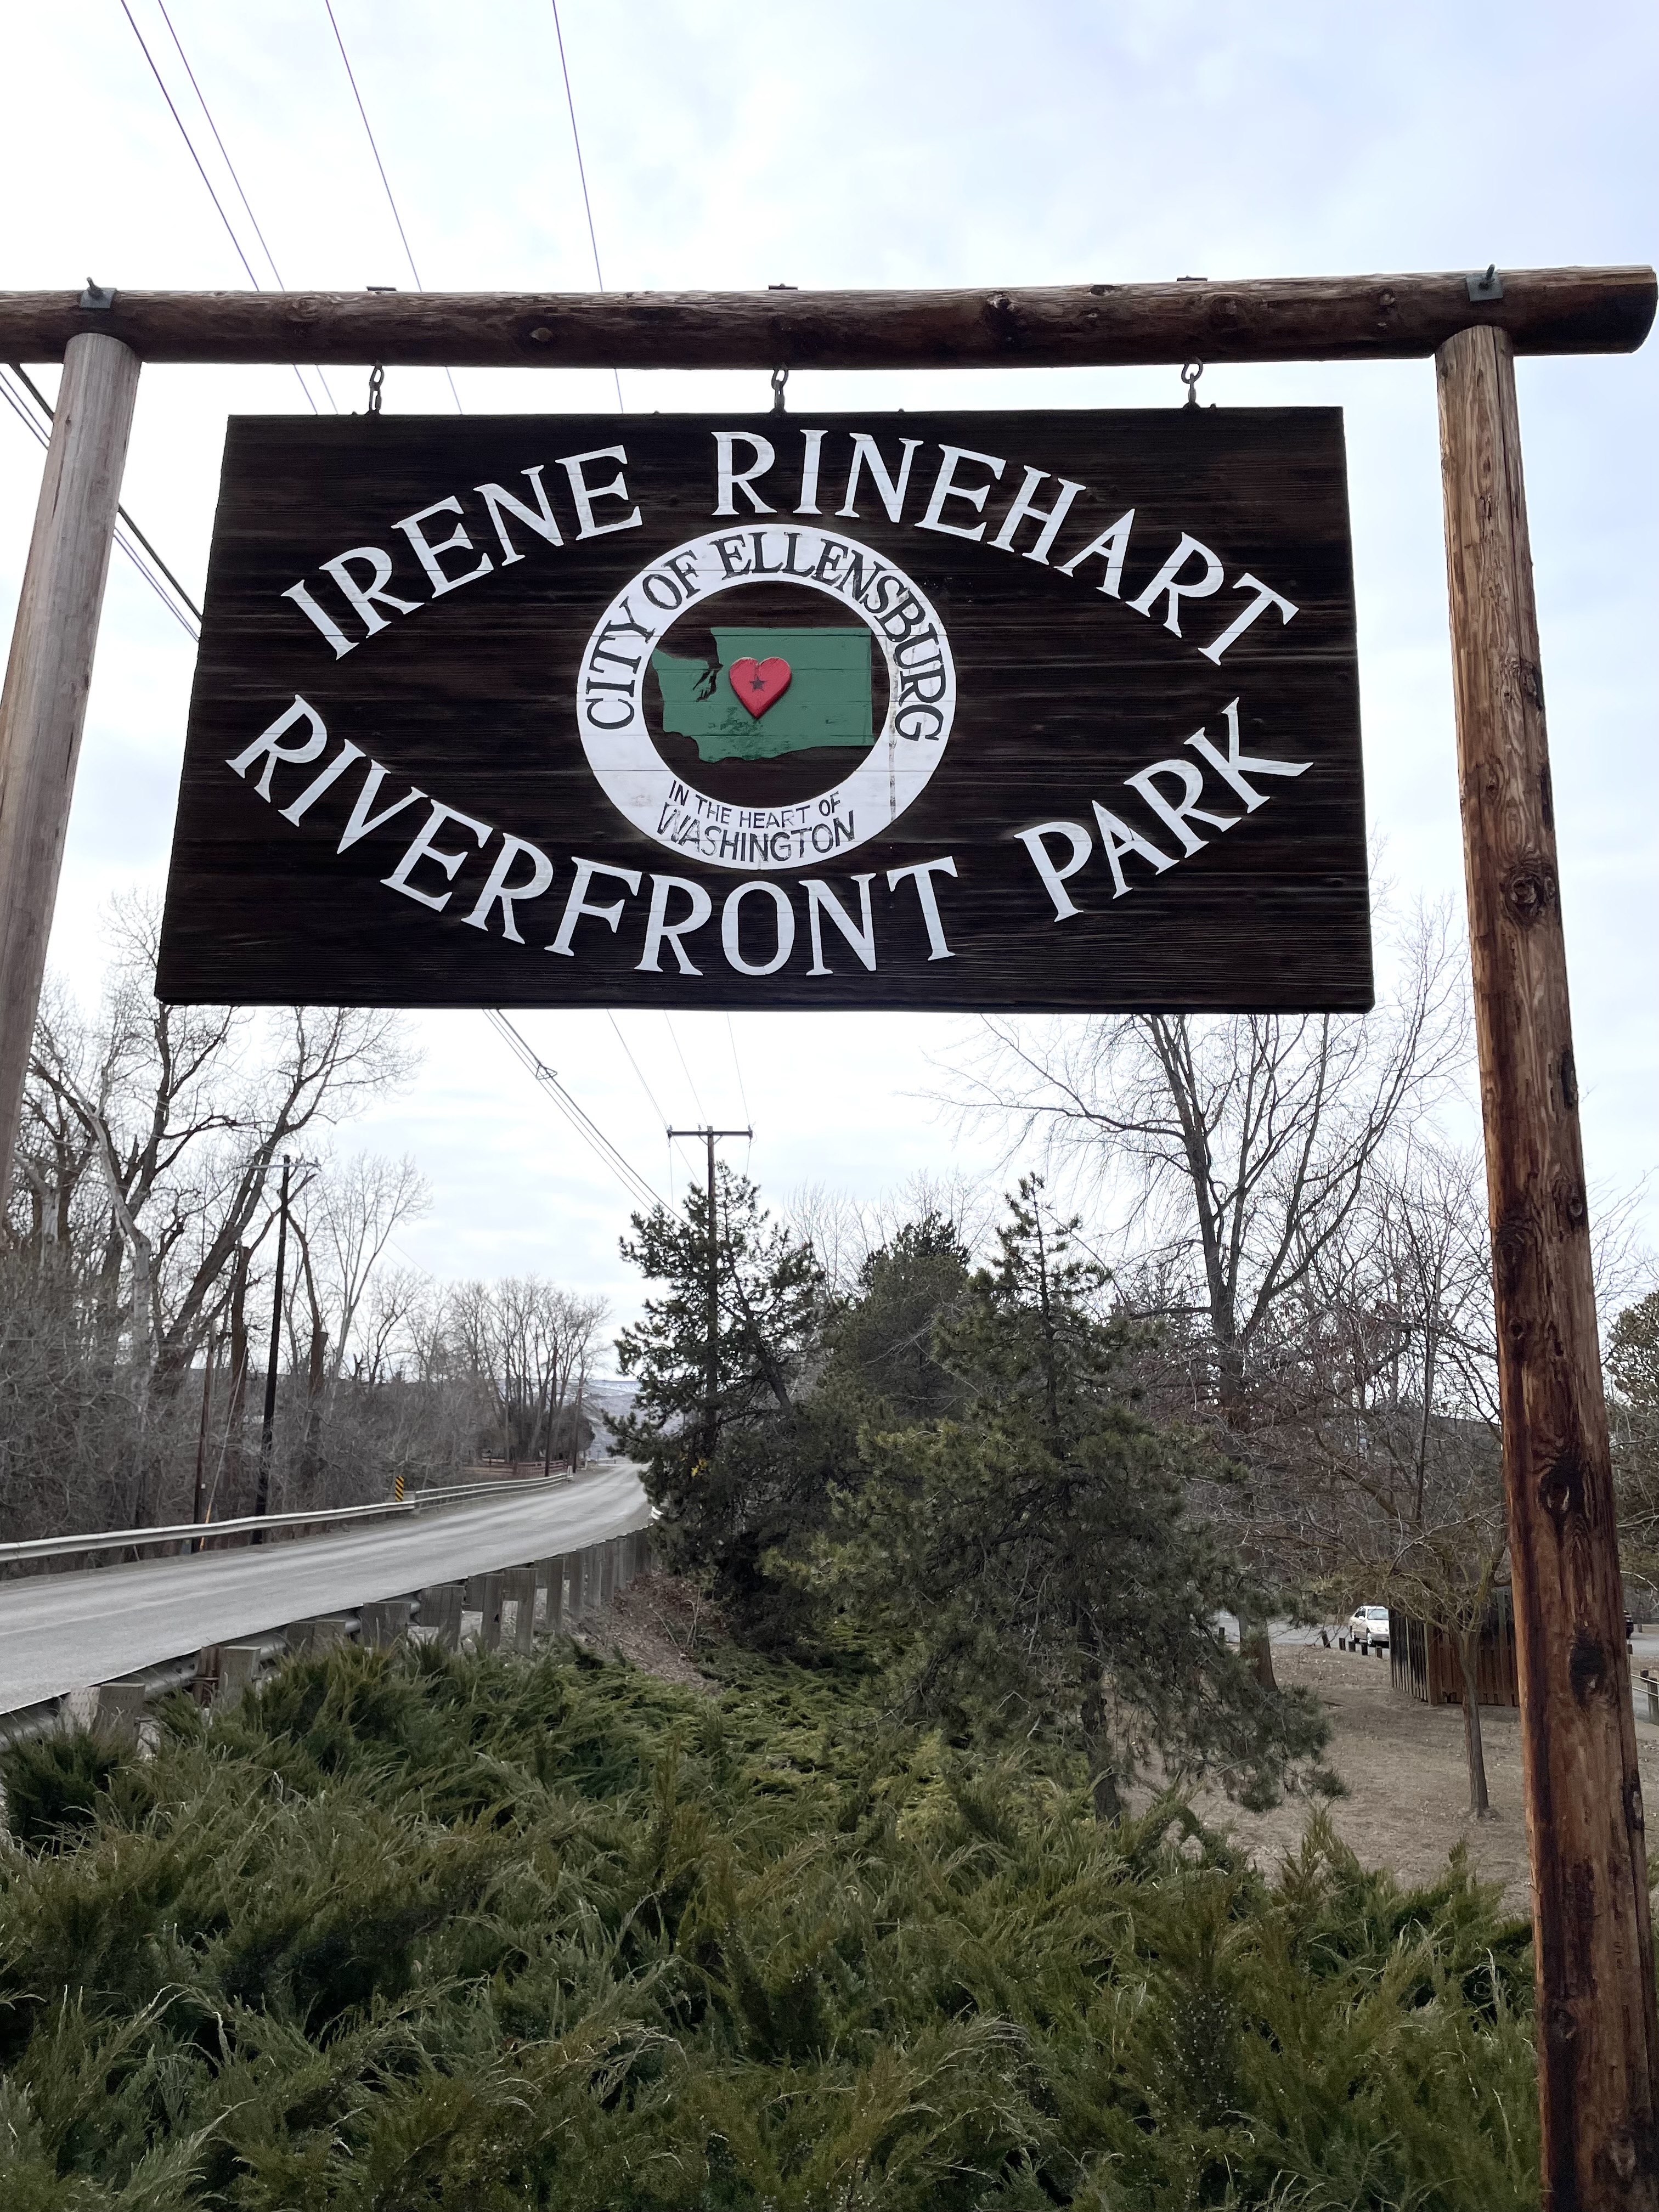 The Irene Rinehart Riverfront Park was named after the subject of Marchand's poem, so she spent some time writing her sonnet there. Photo by Marie Marchand.